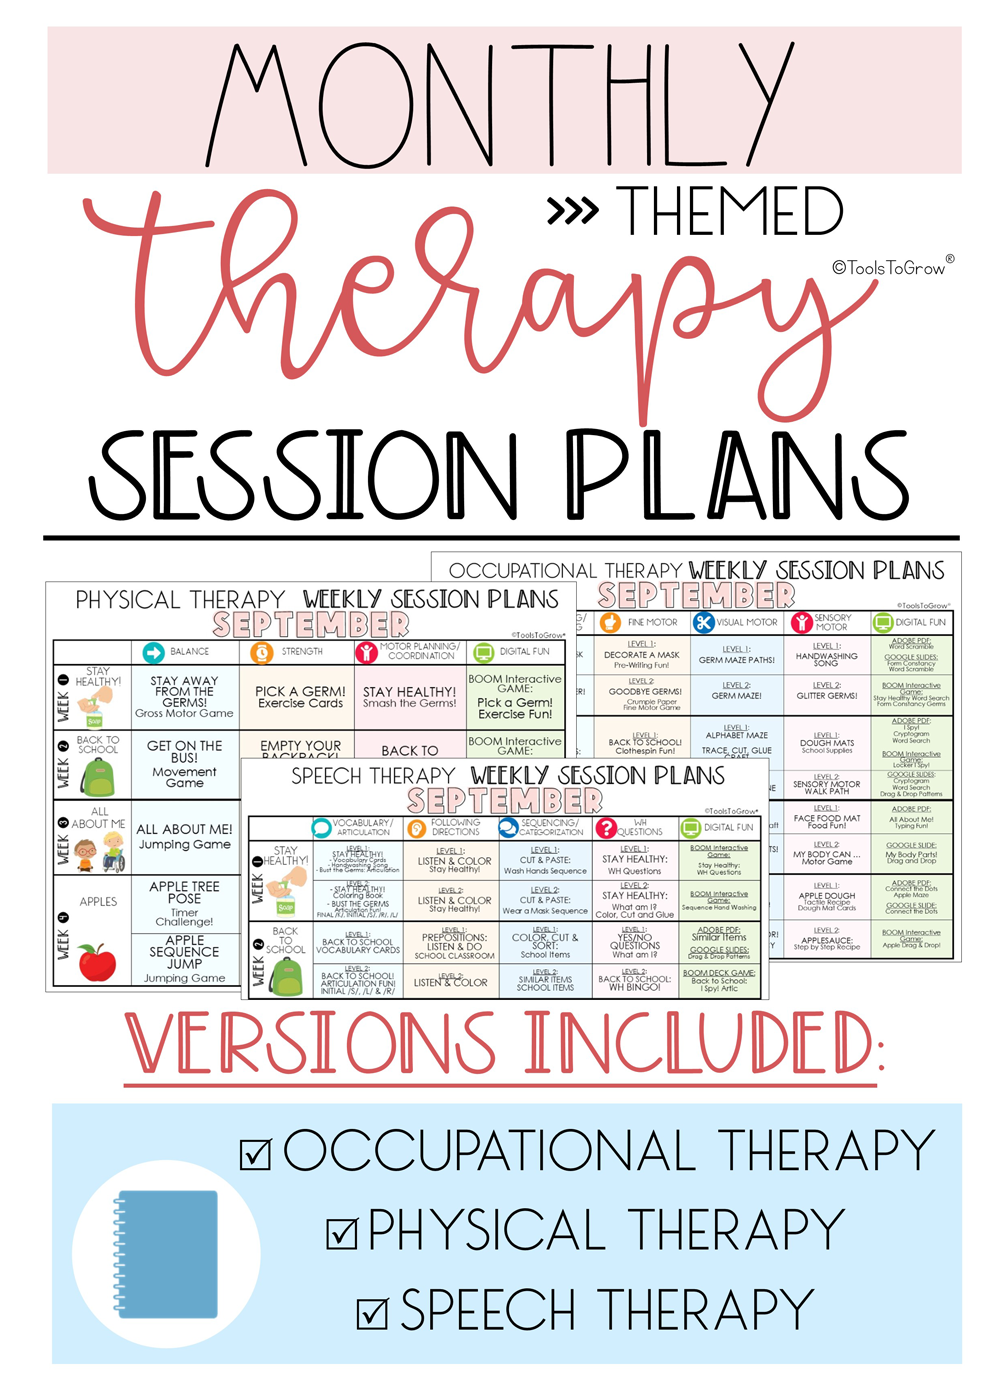 Monthly Themed Therapy Session Plans Blog Tools To Grow, Inc.